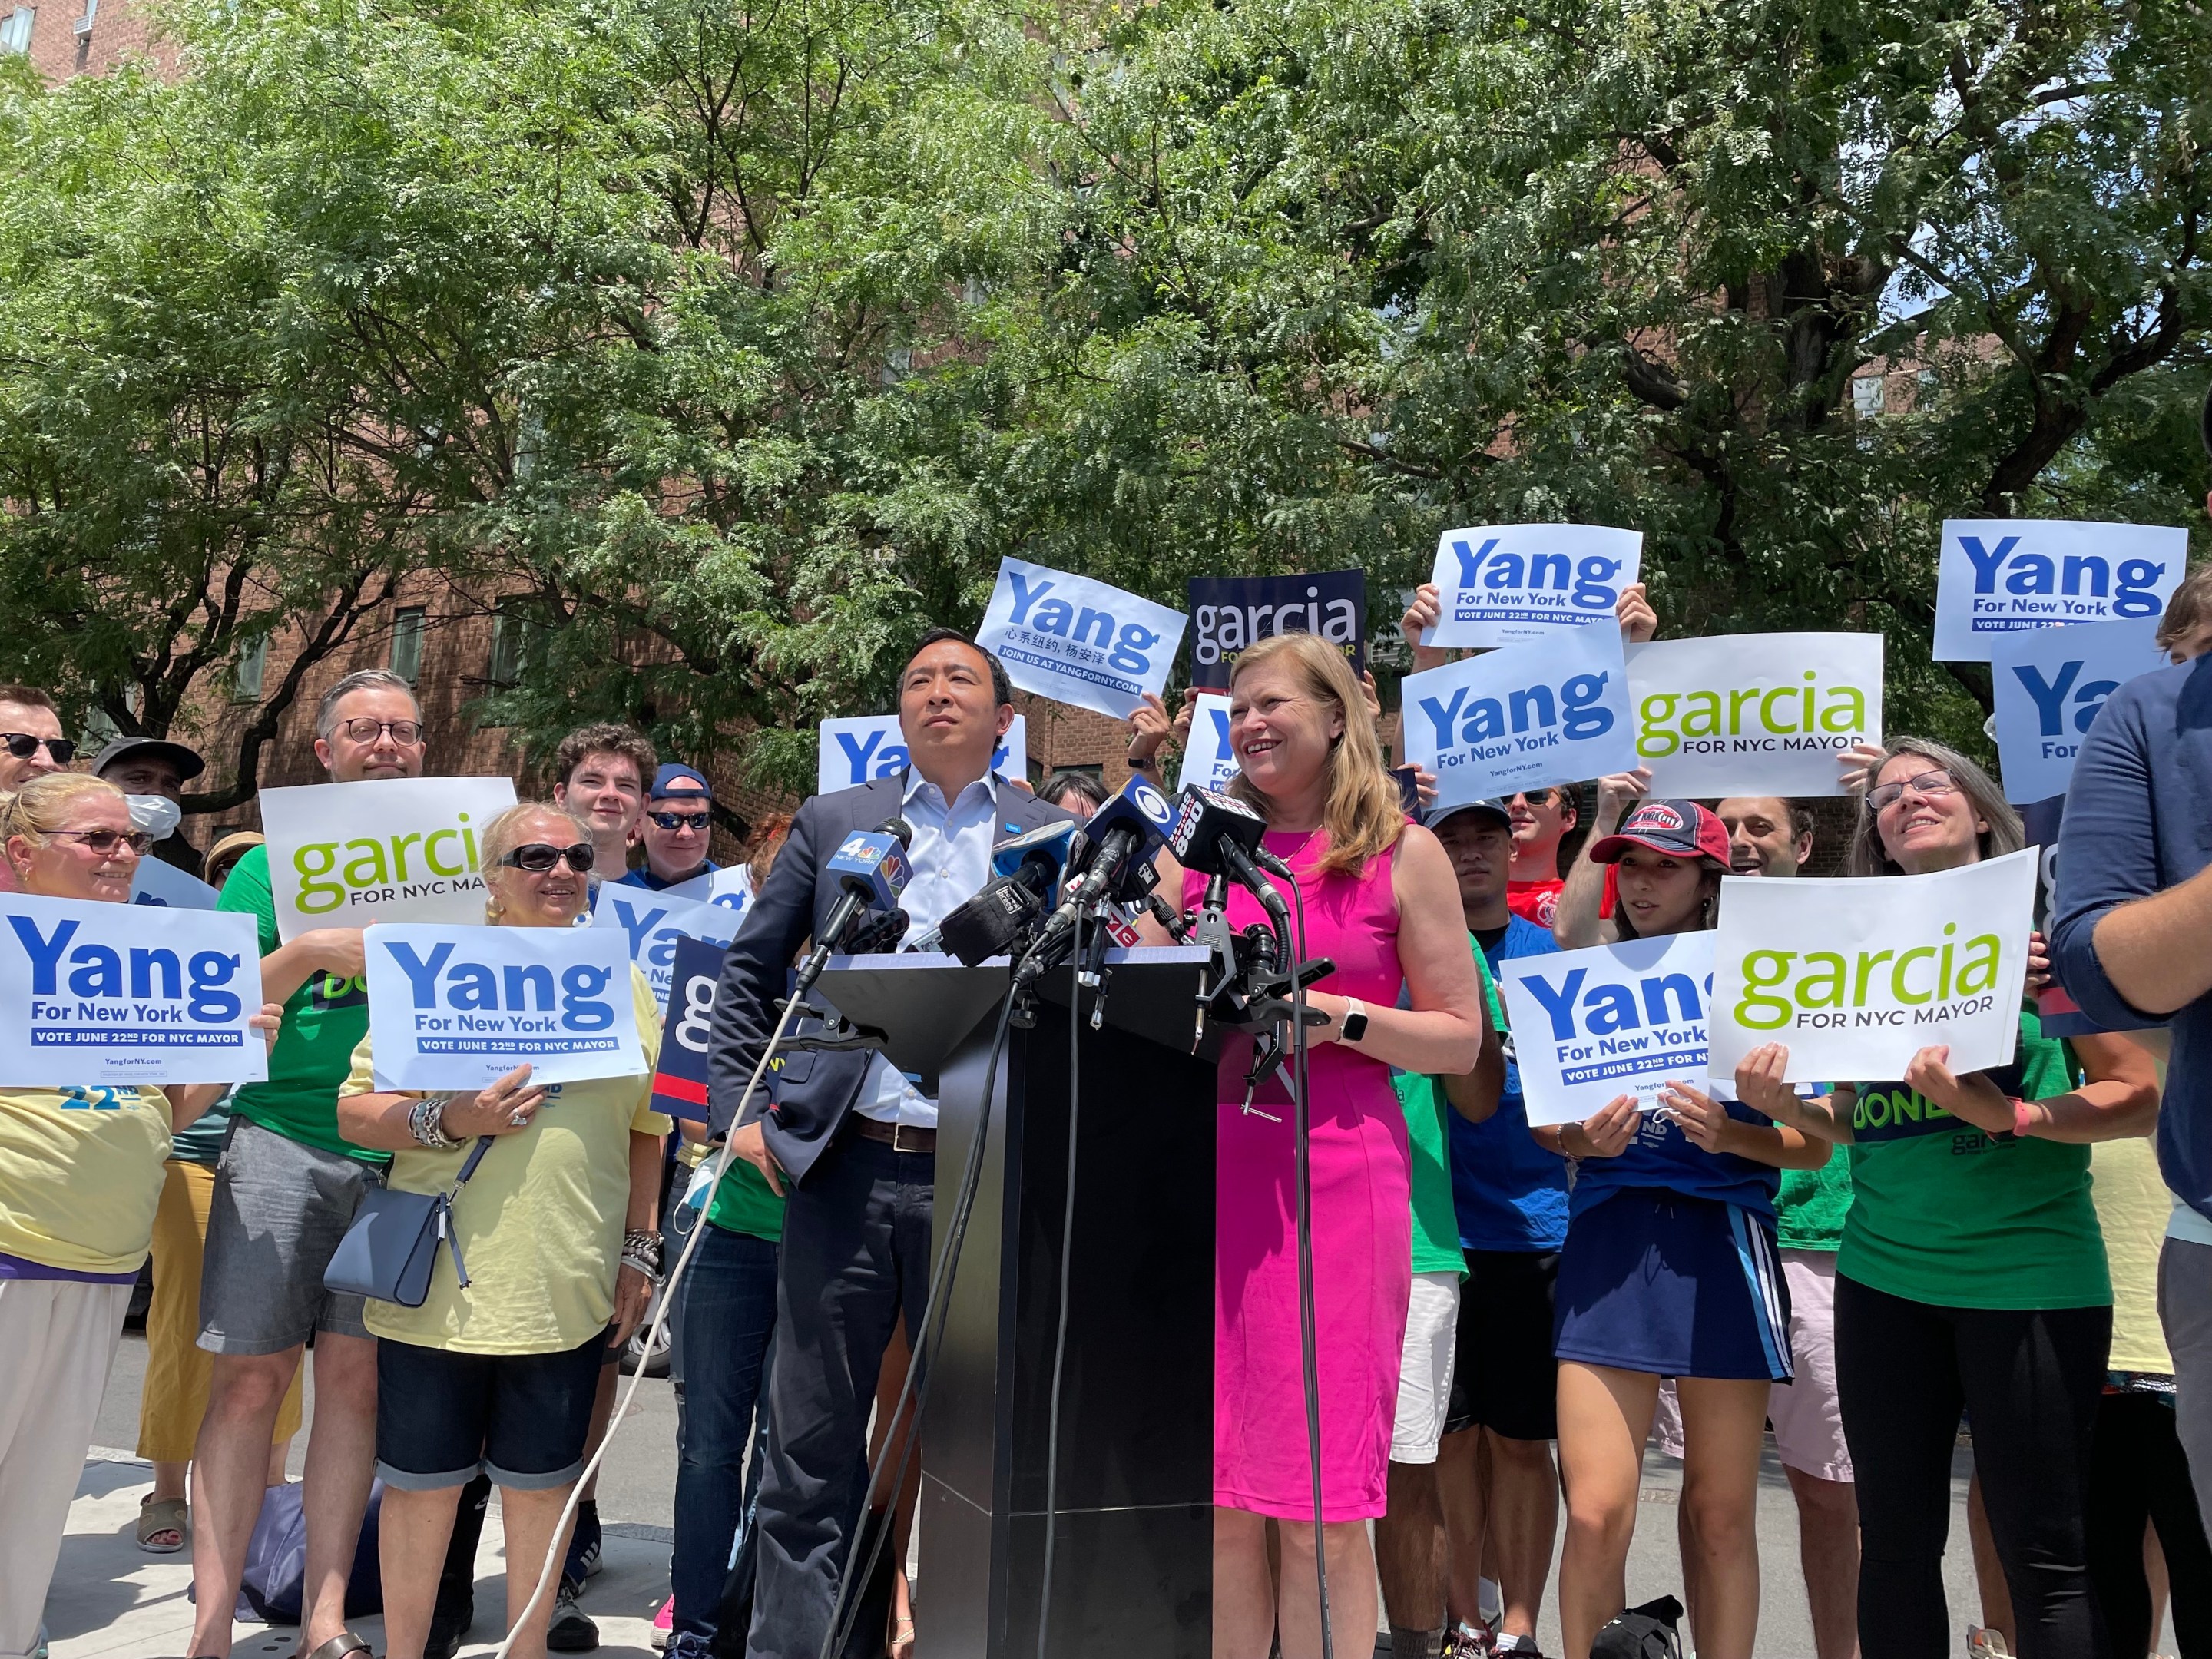 Candidates Andrew Yang and Kathryn Garcia stand side by side behind a podium in Lower Manhattan.